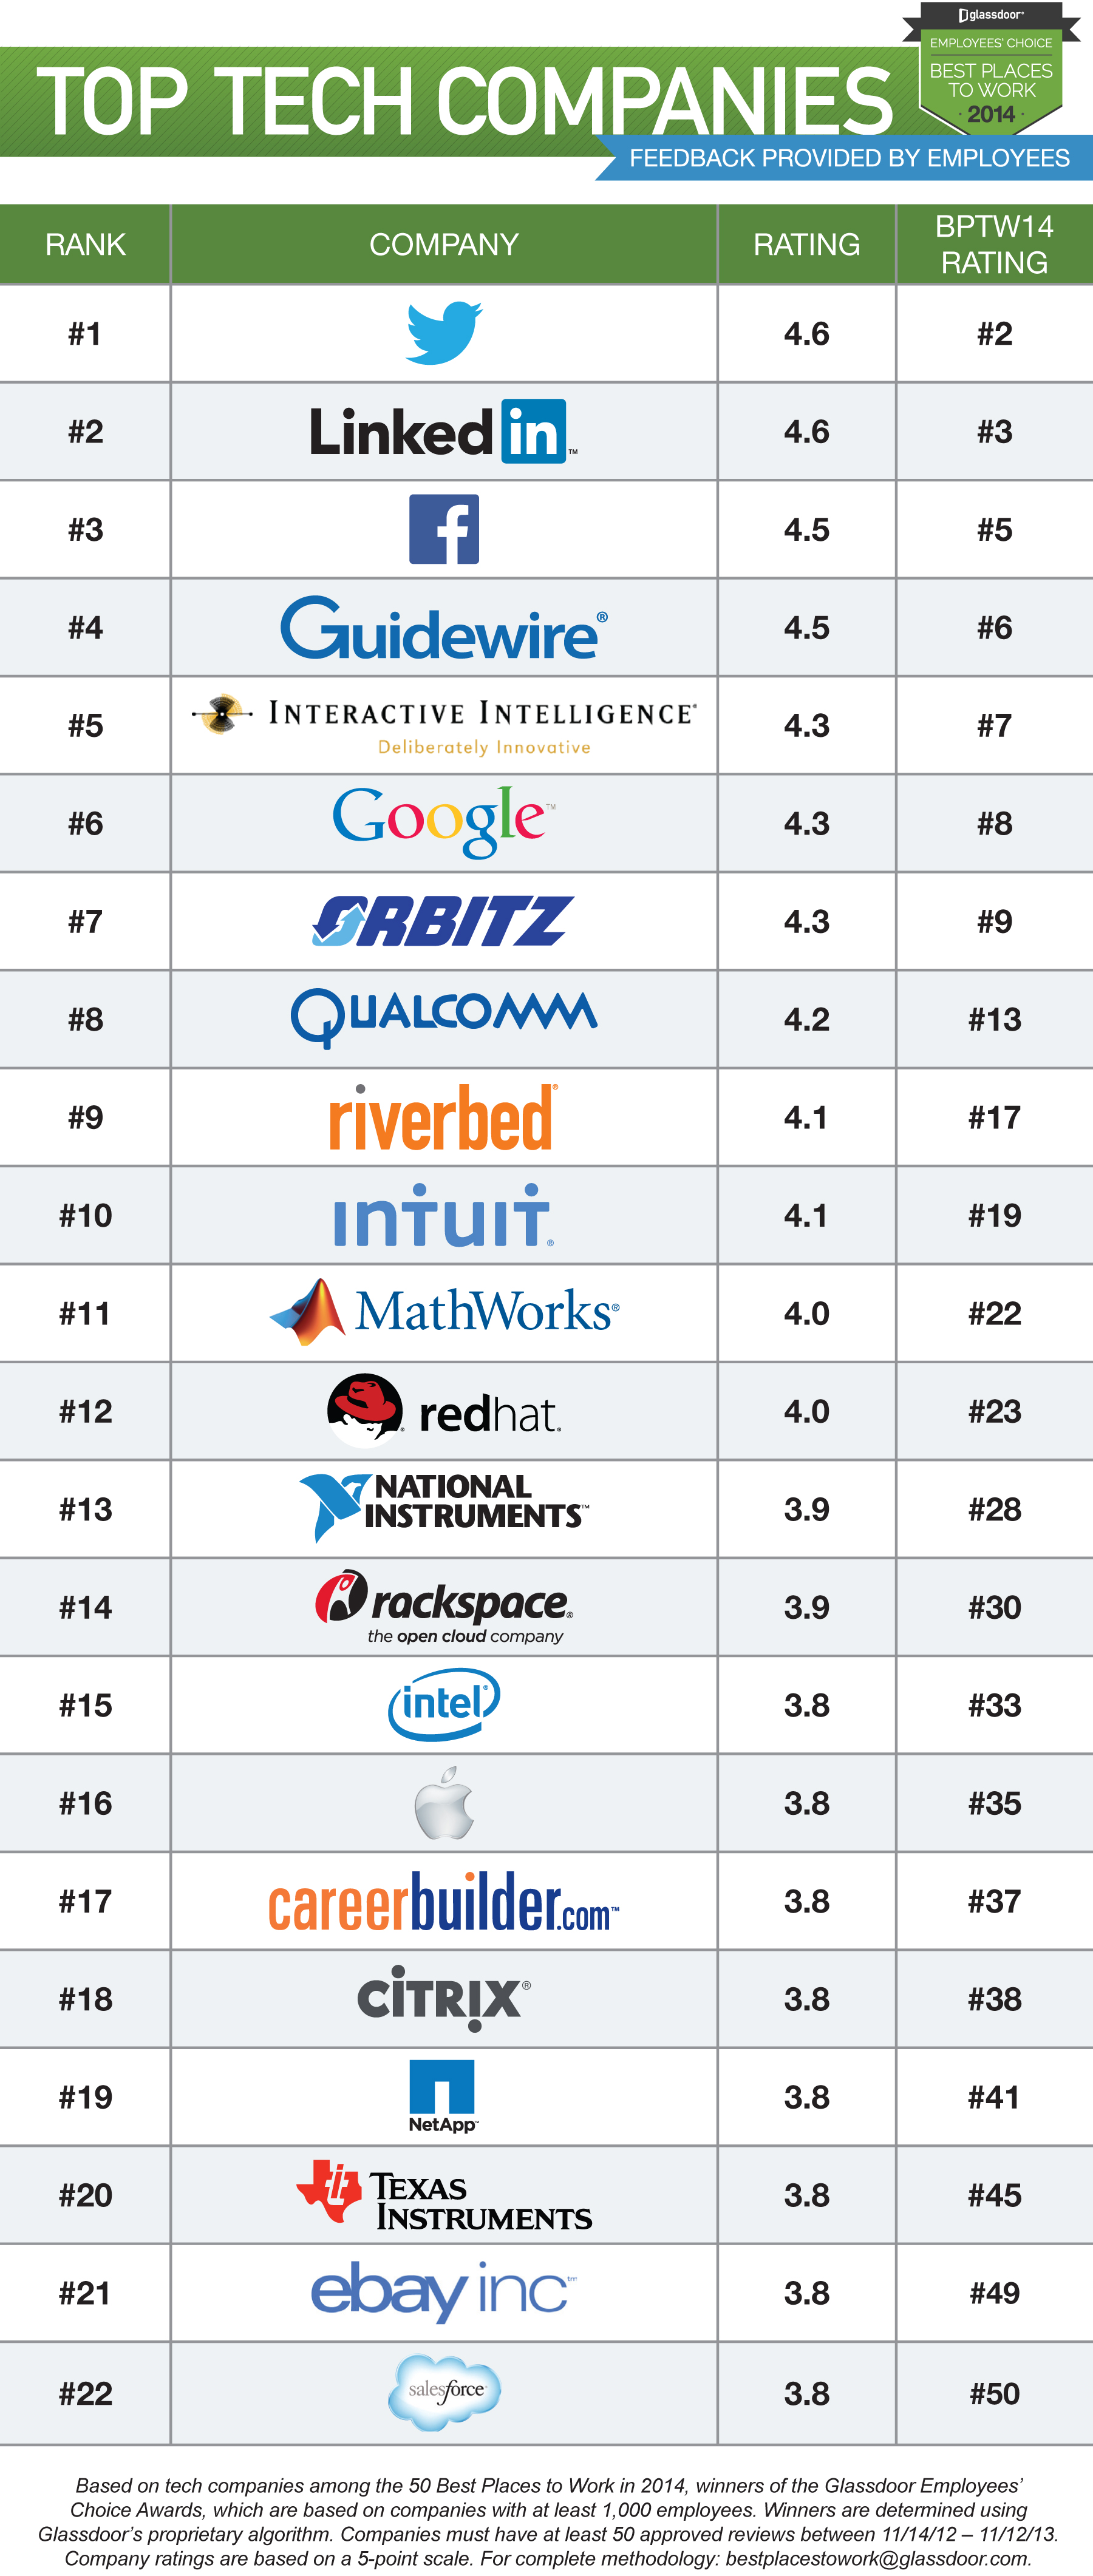 Twitter Best Tech Company to Work For, LinkedIn Second, Facebook Third